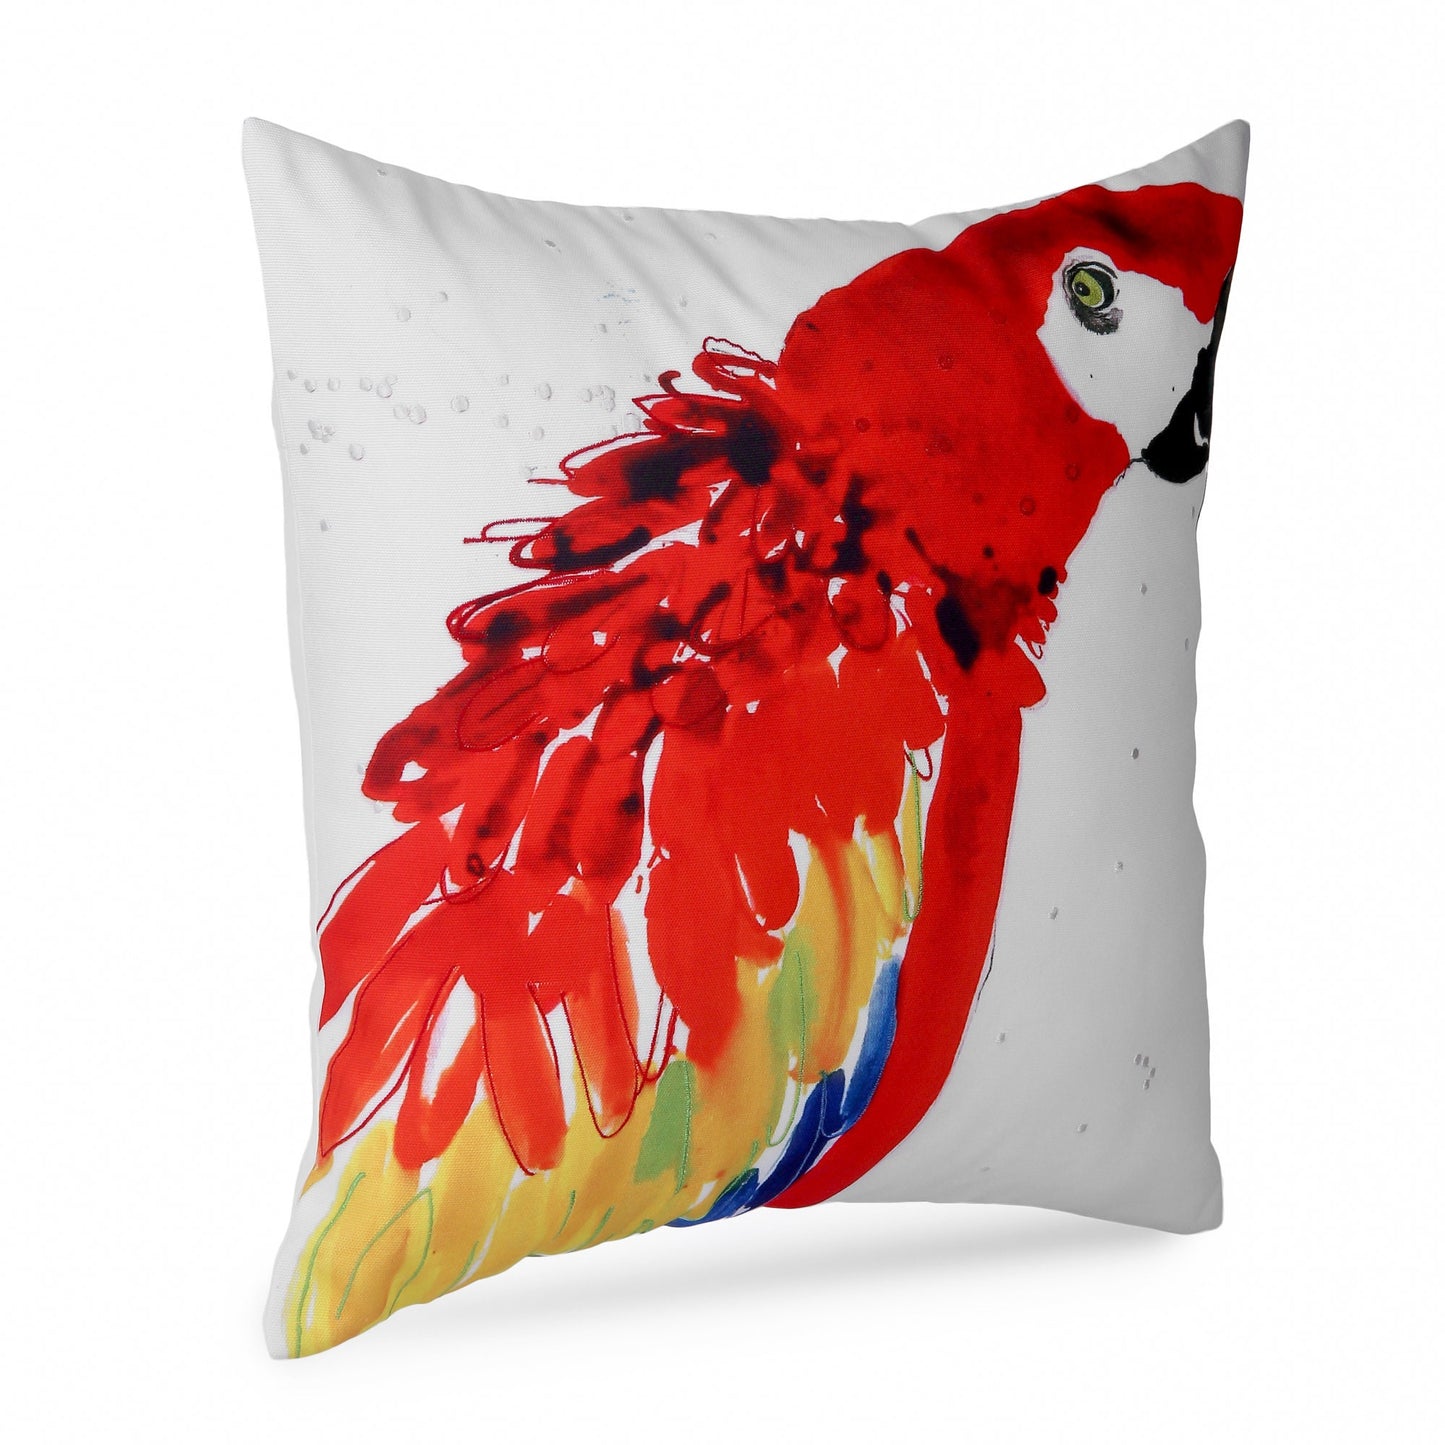 Red Parrot Digital Print Cushion Cover 18x18"